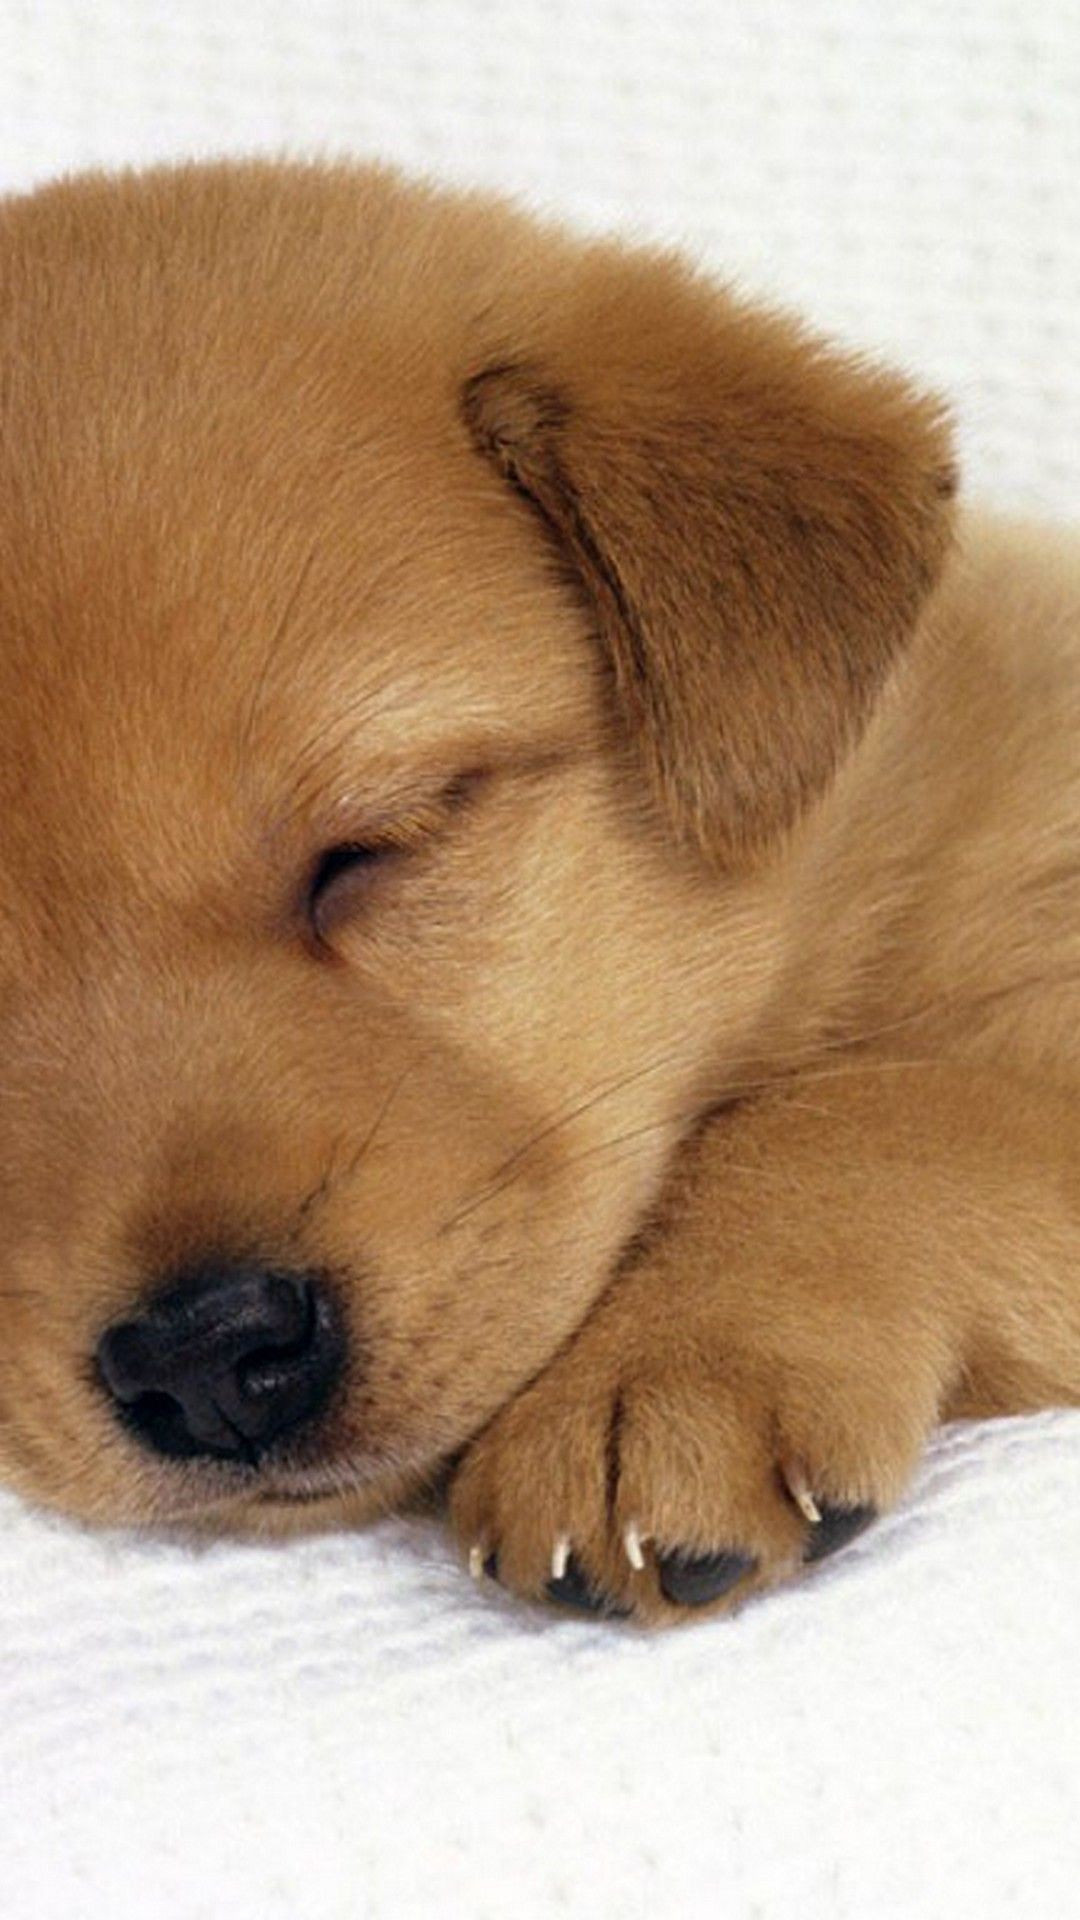 1080x1920, 19 Photos Of Wallpapers Puppy Awesome Cute - Cute Dog Wallpaper  Hd - 1080x1920 Wallpaper 